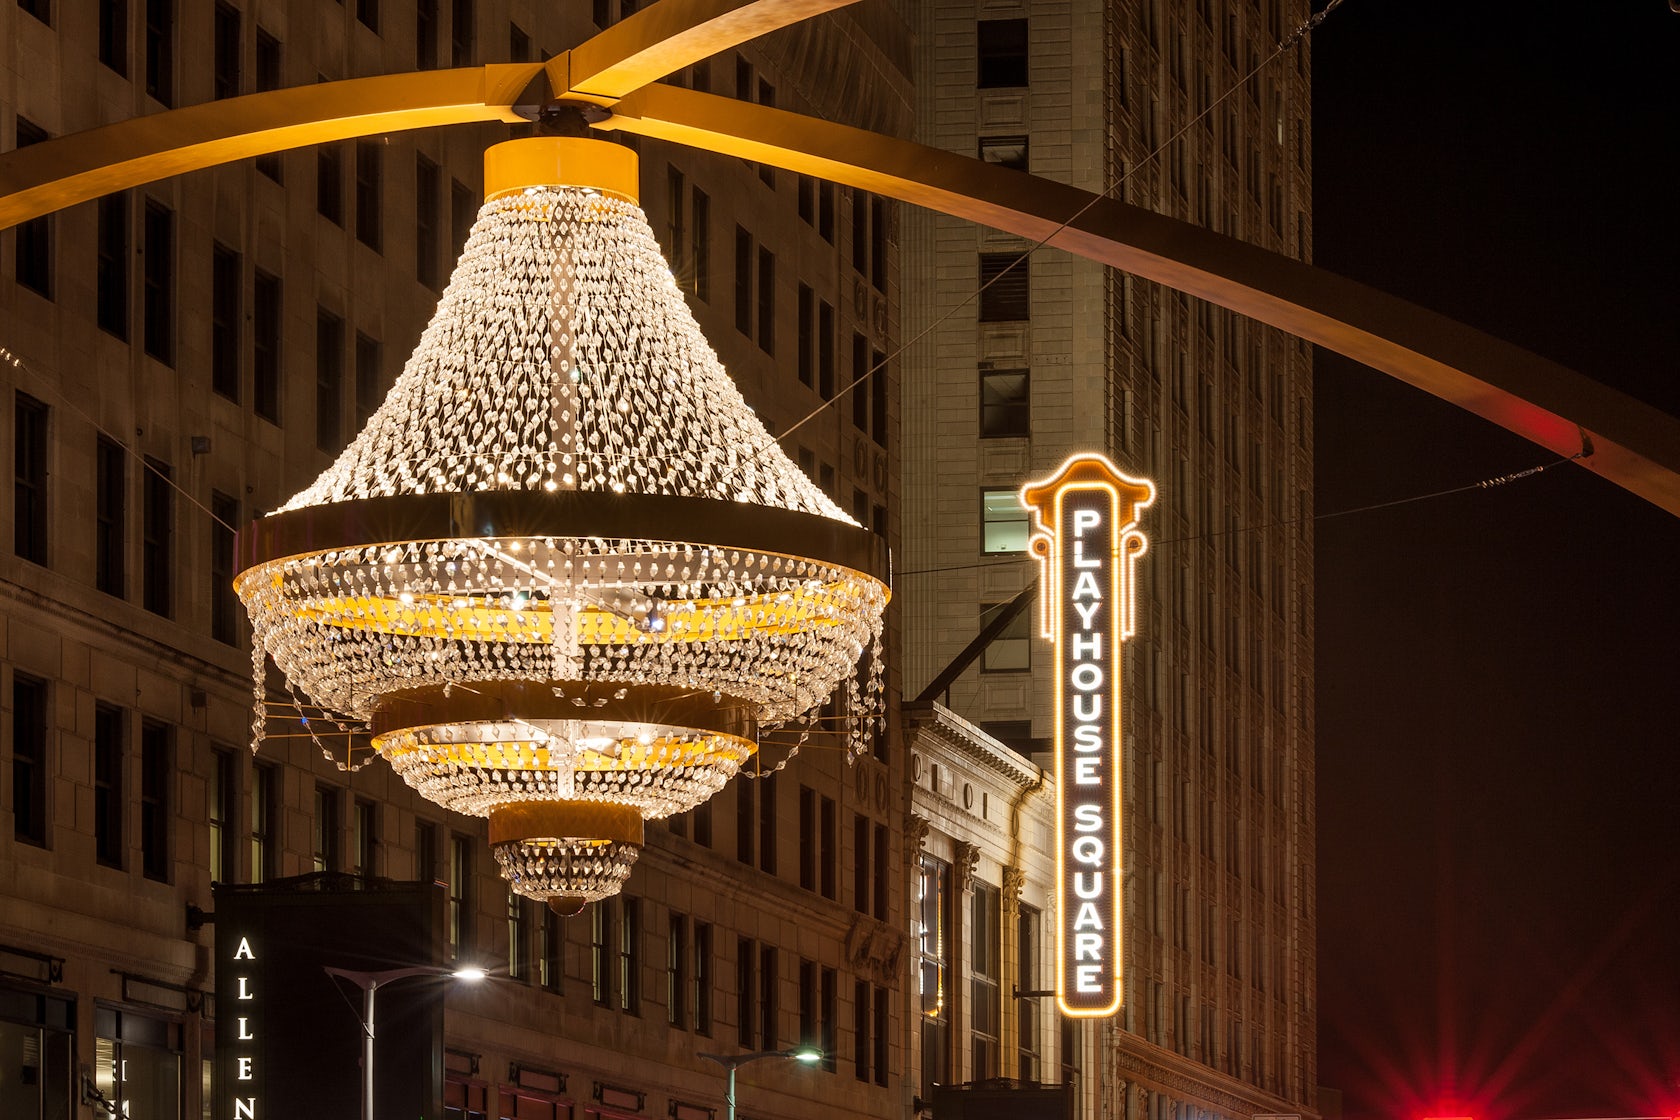 Playhouse Square by DCL (Design Communications Ltd.) Architizer